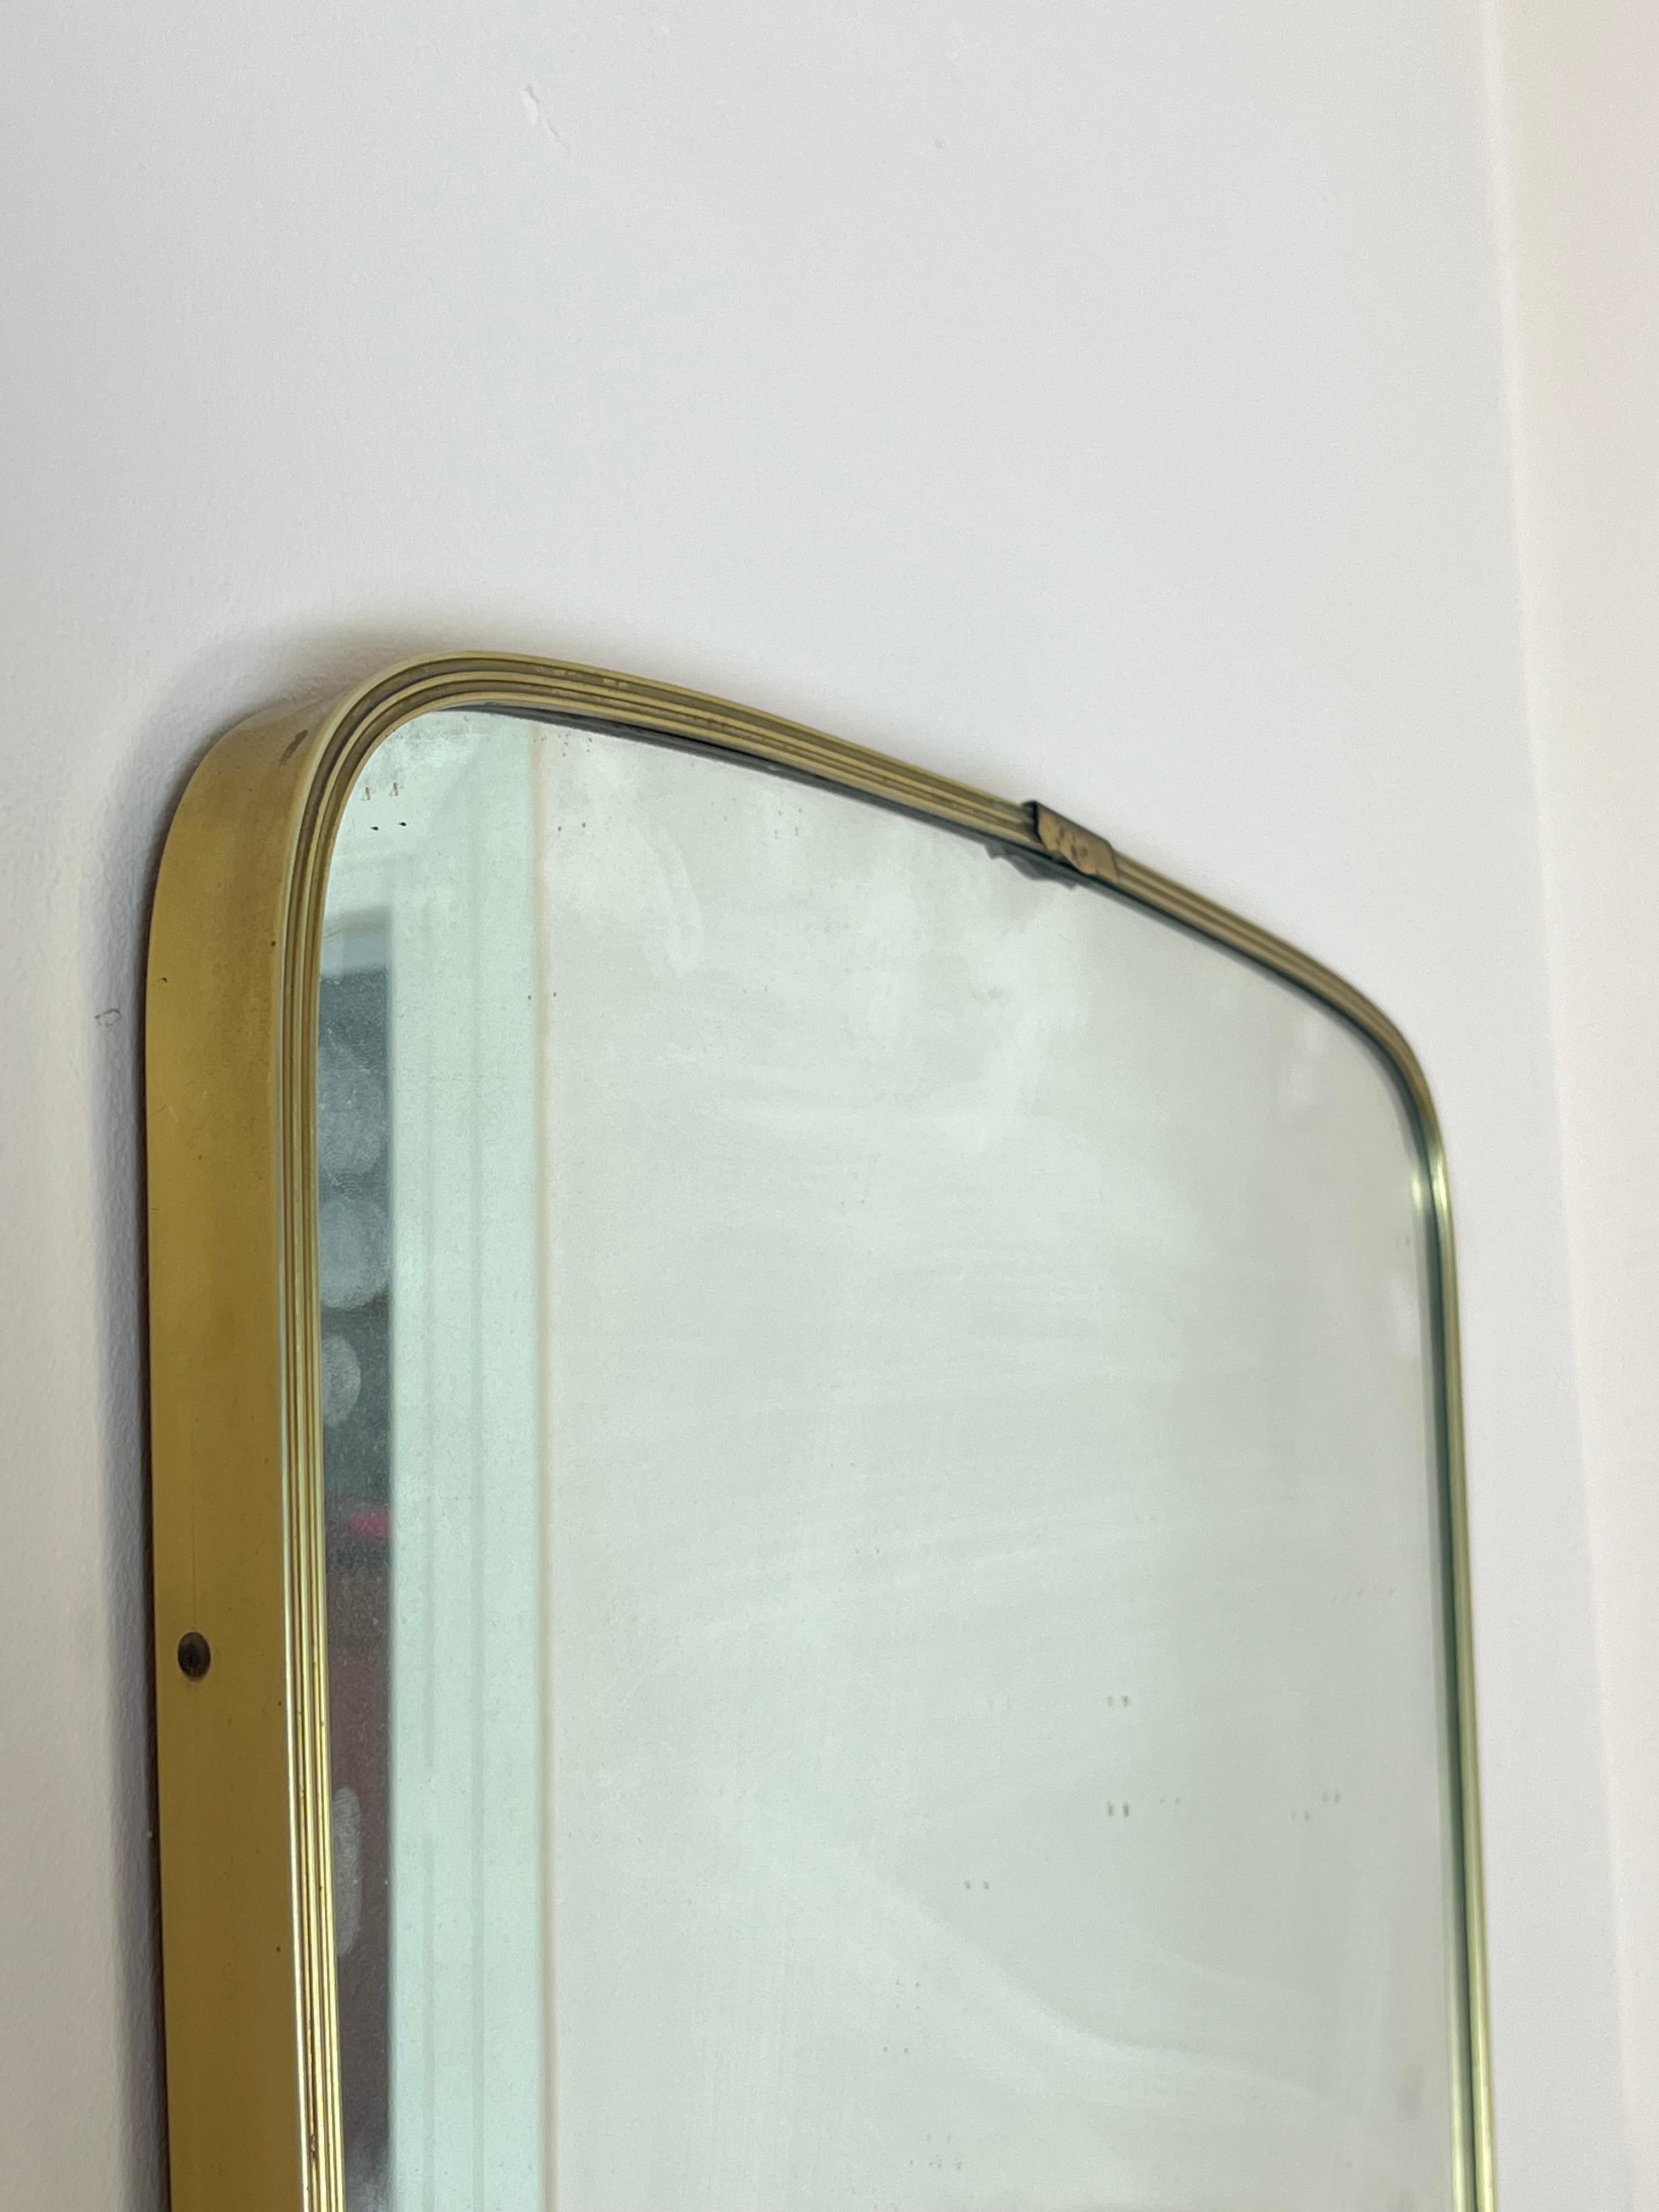 Other Italian Brass Mirror Attributed To Gio Ponti  1960s For Sale